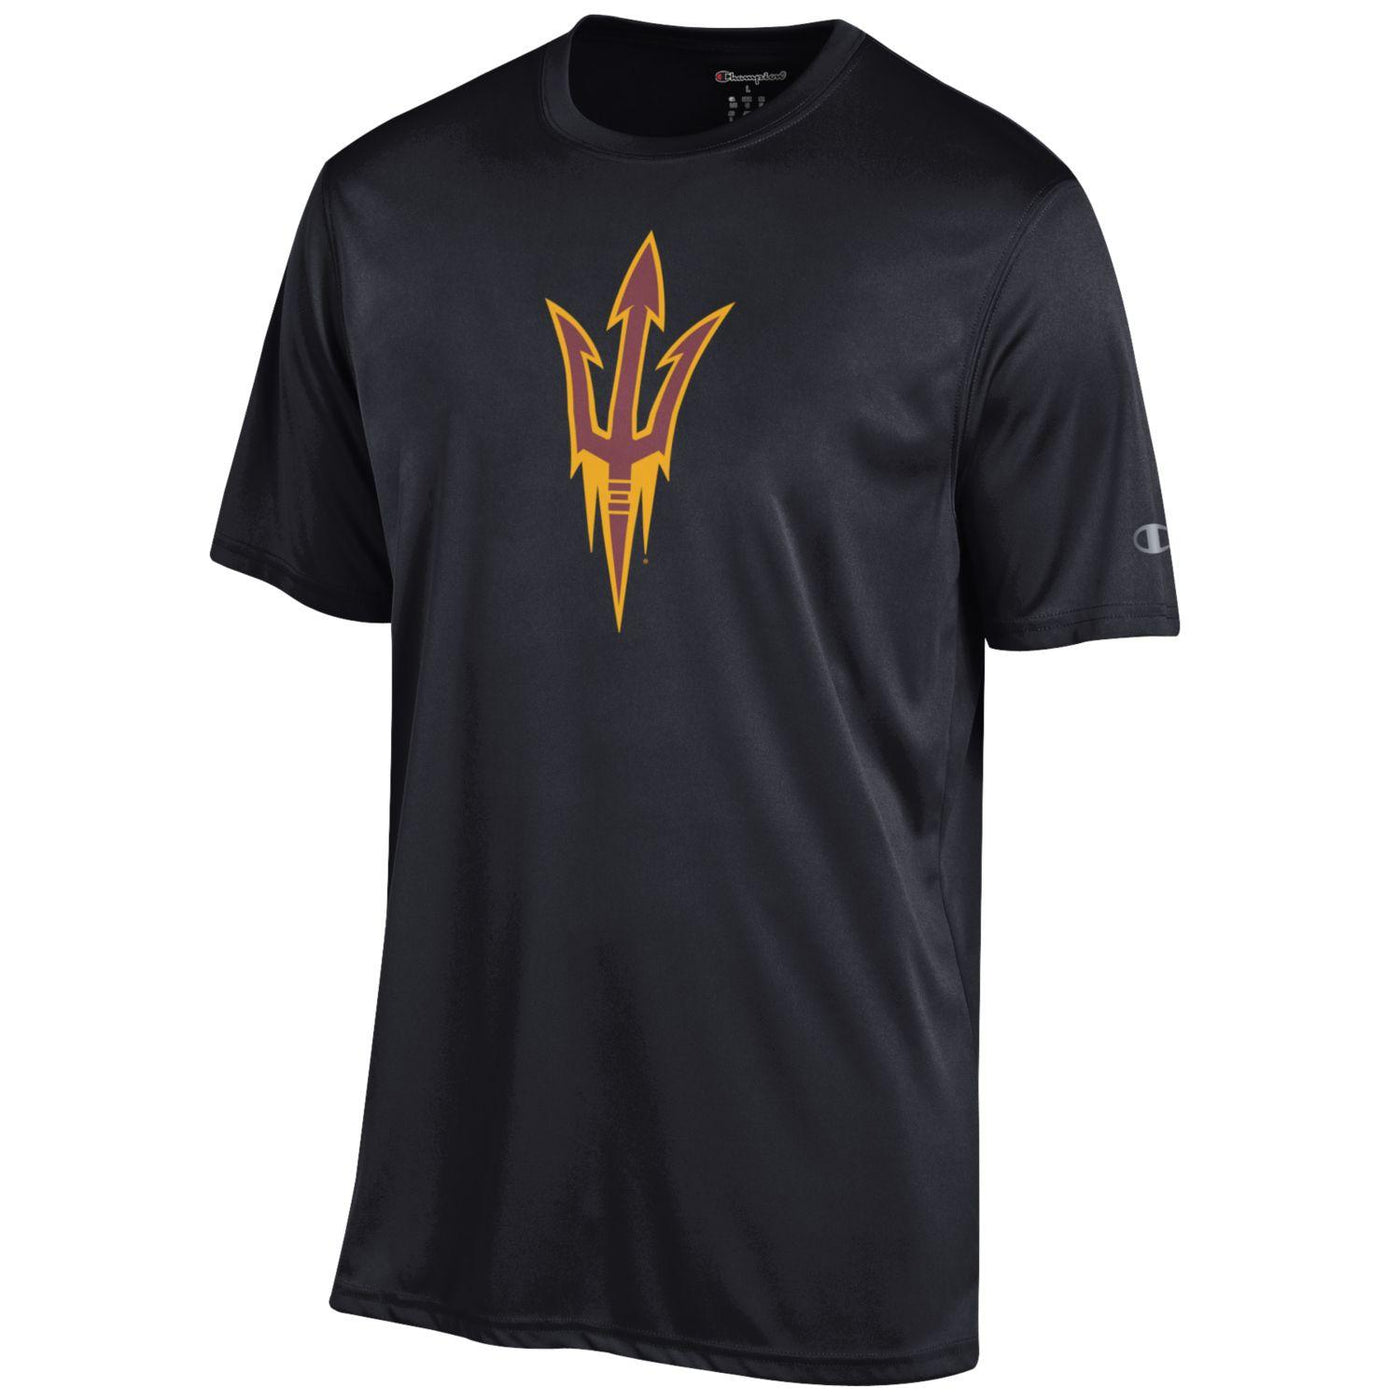 ASU black athletic tee with pitchfork in maroon and gold